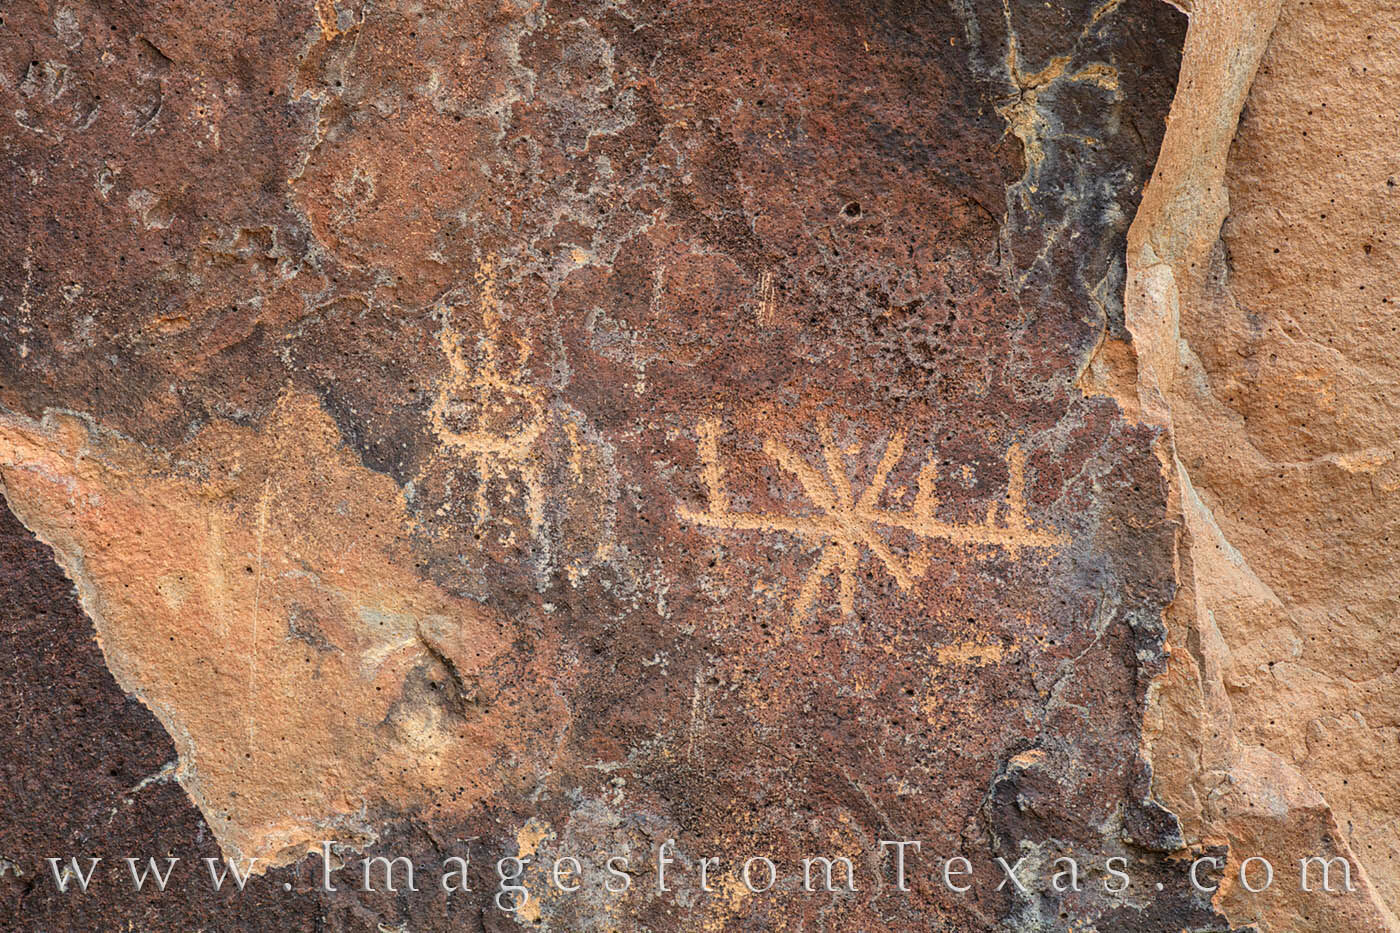 Along a remote trail in Big Bend National Park, a friend of mine and I happened upon a rare petroglyph. These ancient rock carvings...